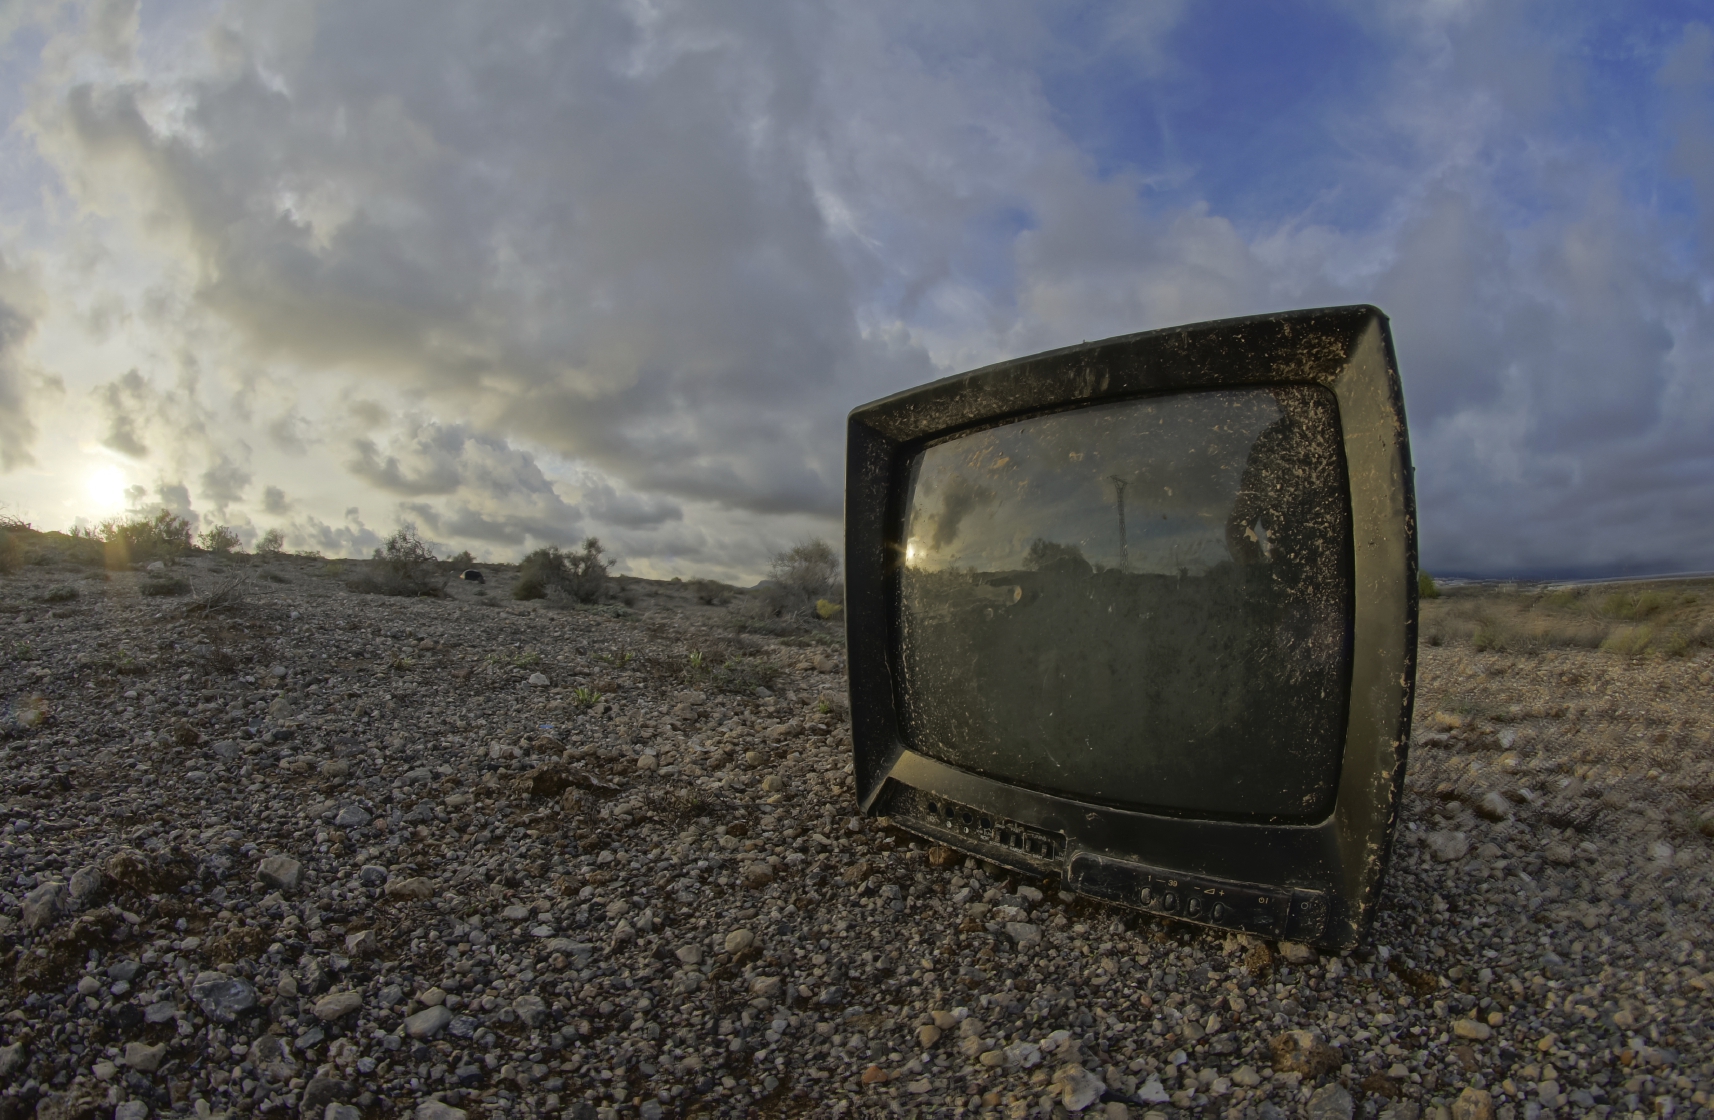 Diagnose your Broken Television with Electronic Worlds handy guide